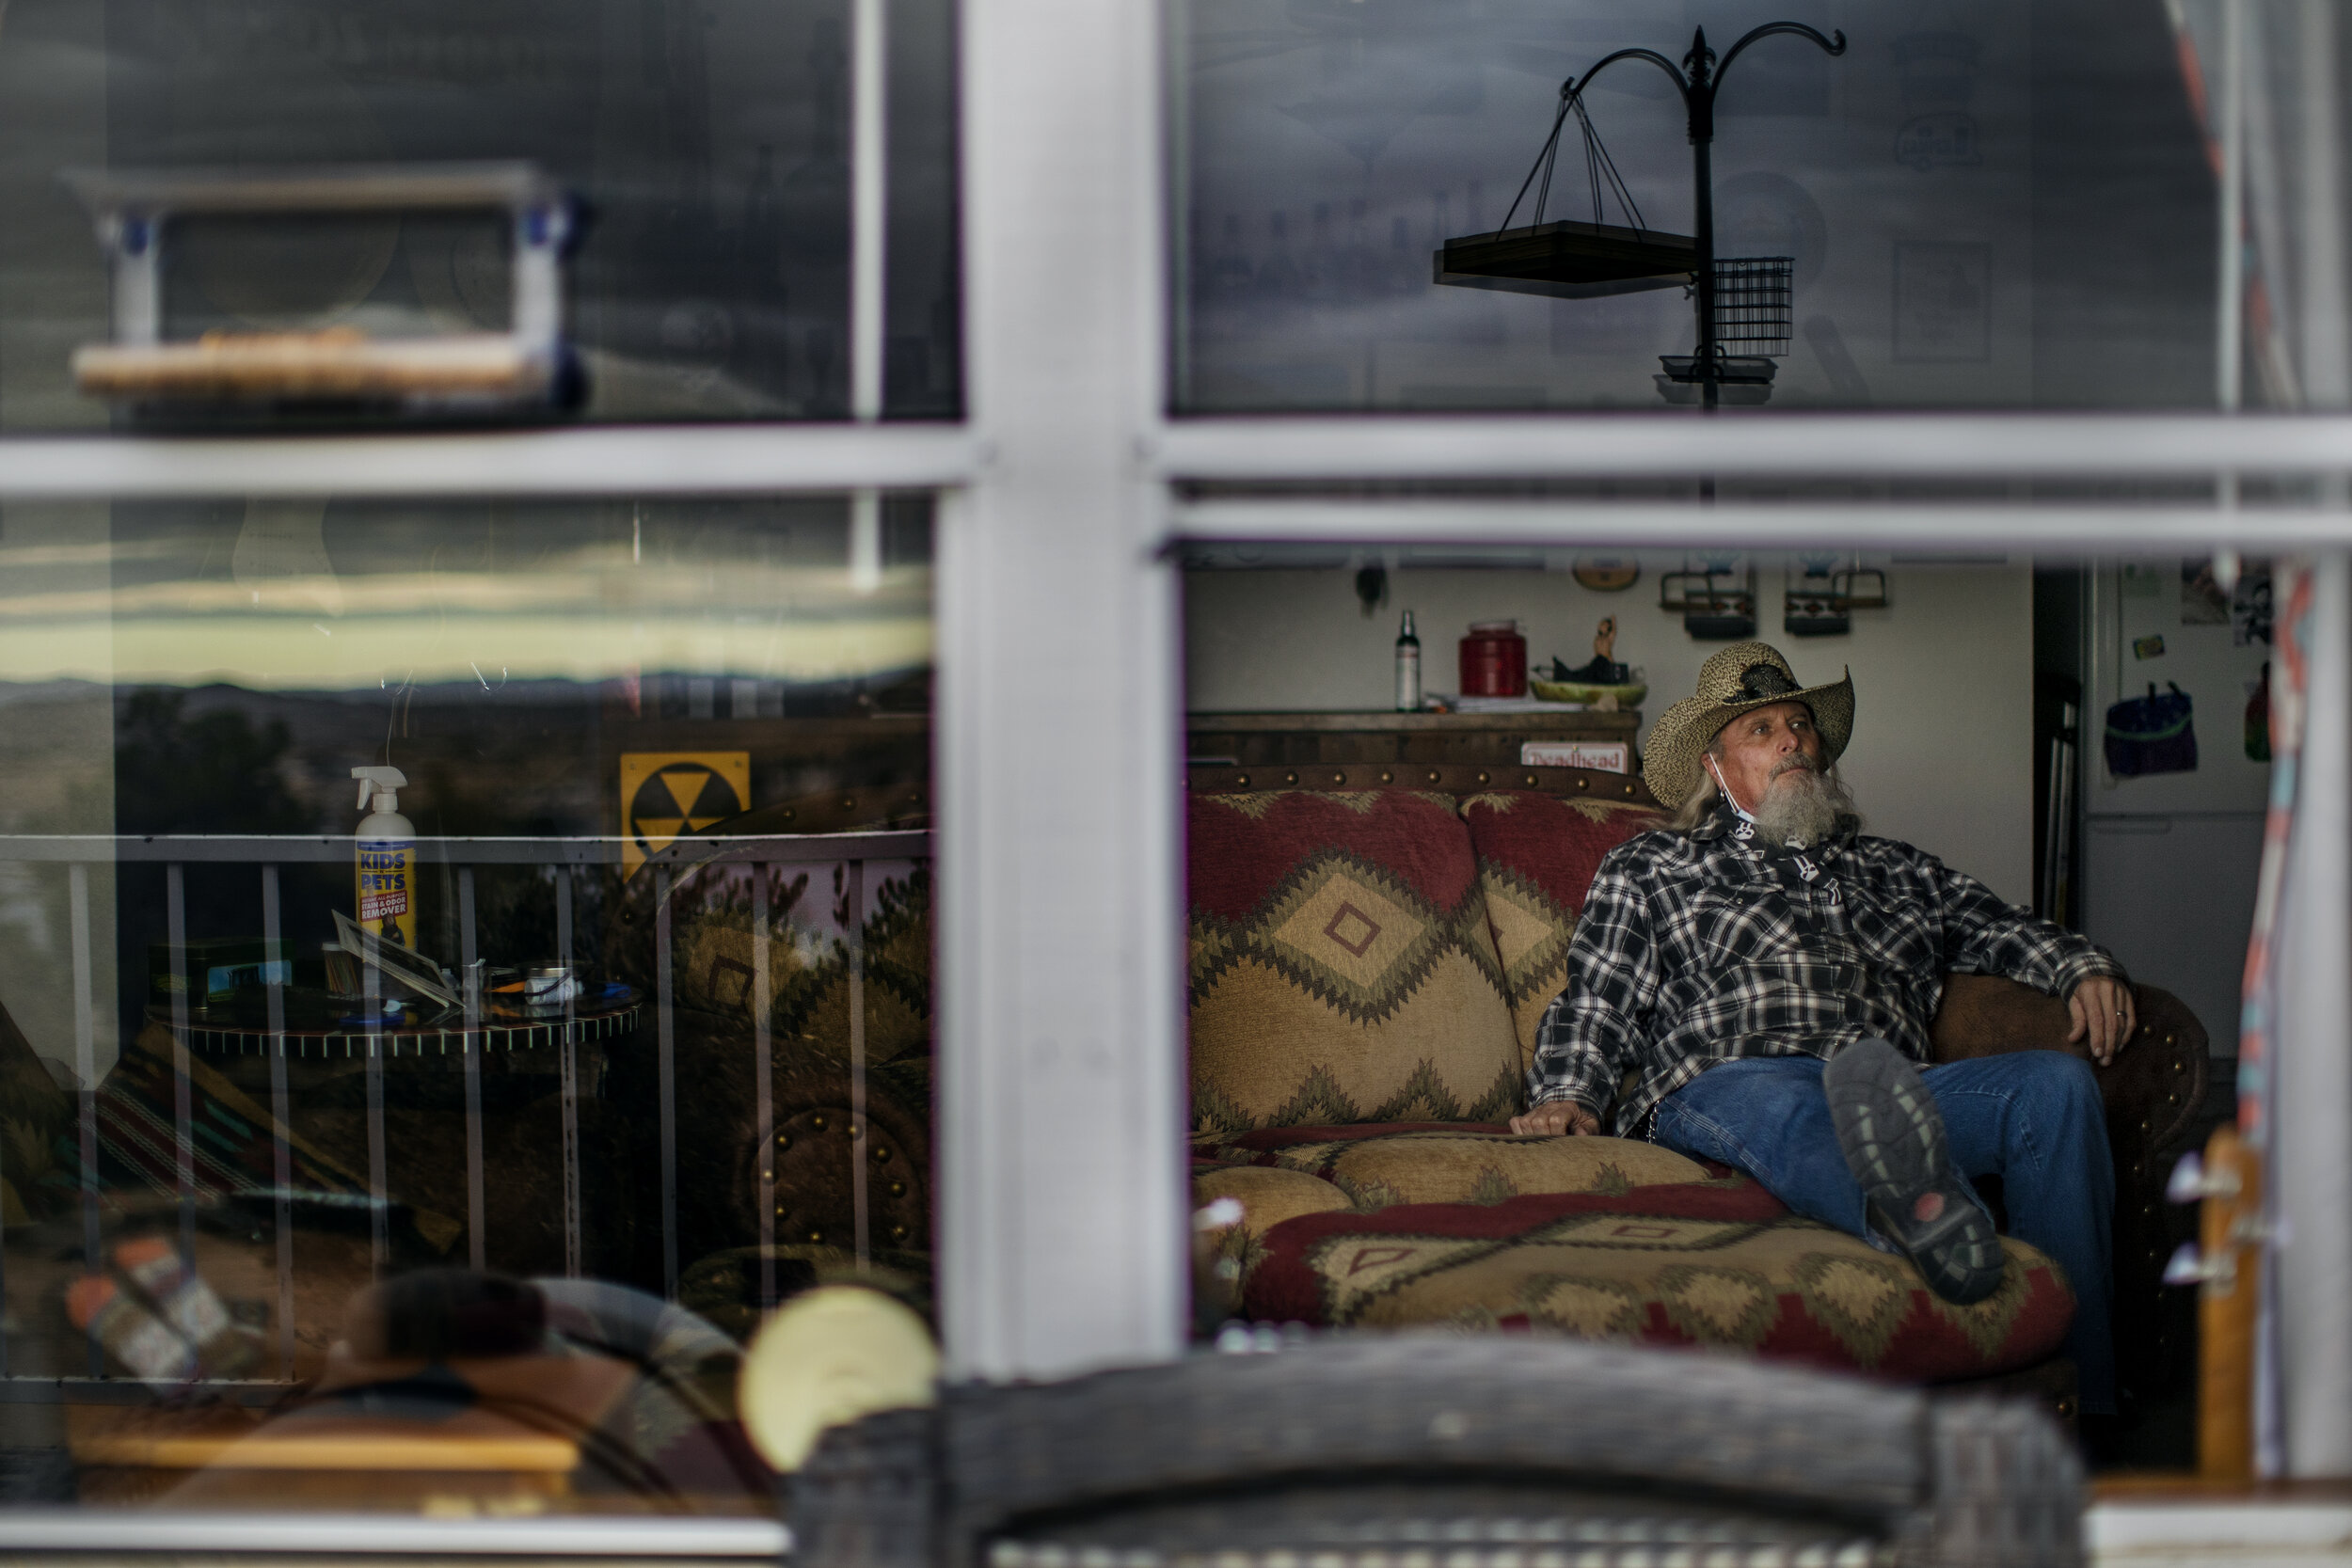  JOSHUA TREE, CA - DECEMBER 12, 2020:  Billy Folsom of Joshua Tree sits on the same spot on the couch where his wife Kim loved to sit and stare out the window at the desert scenery on December 12, 2020 in Joshua Tree, California. Kim died last week a